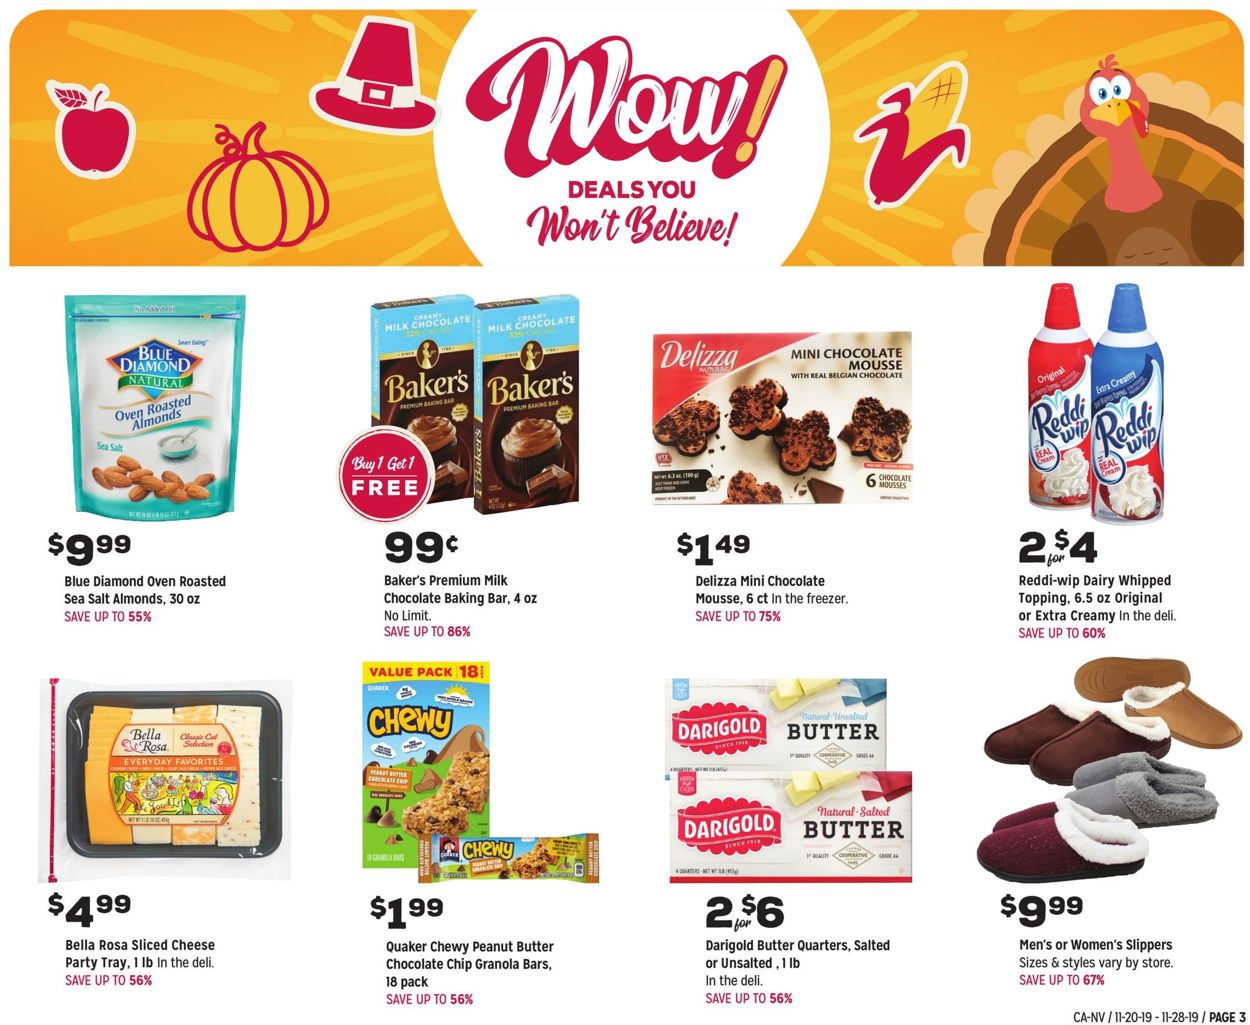 Grocery Outlet - Holiday Ad 2019 Weekly Ad Circular - valid 11/27-12/03/2019 (Page 4)